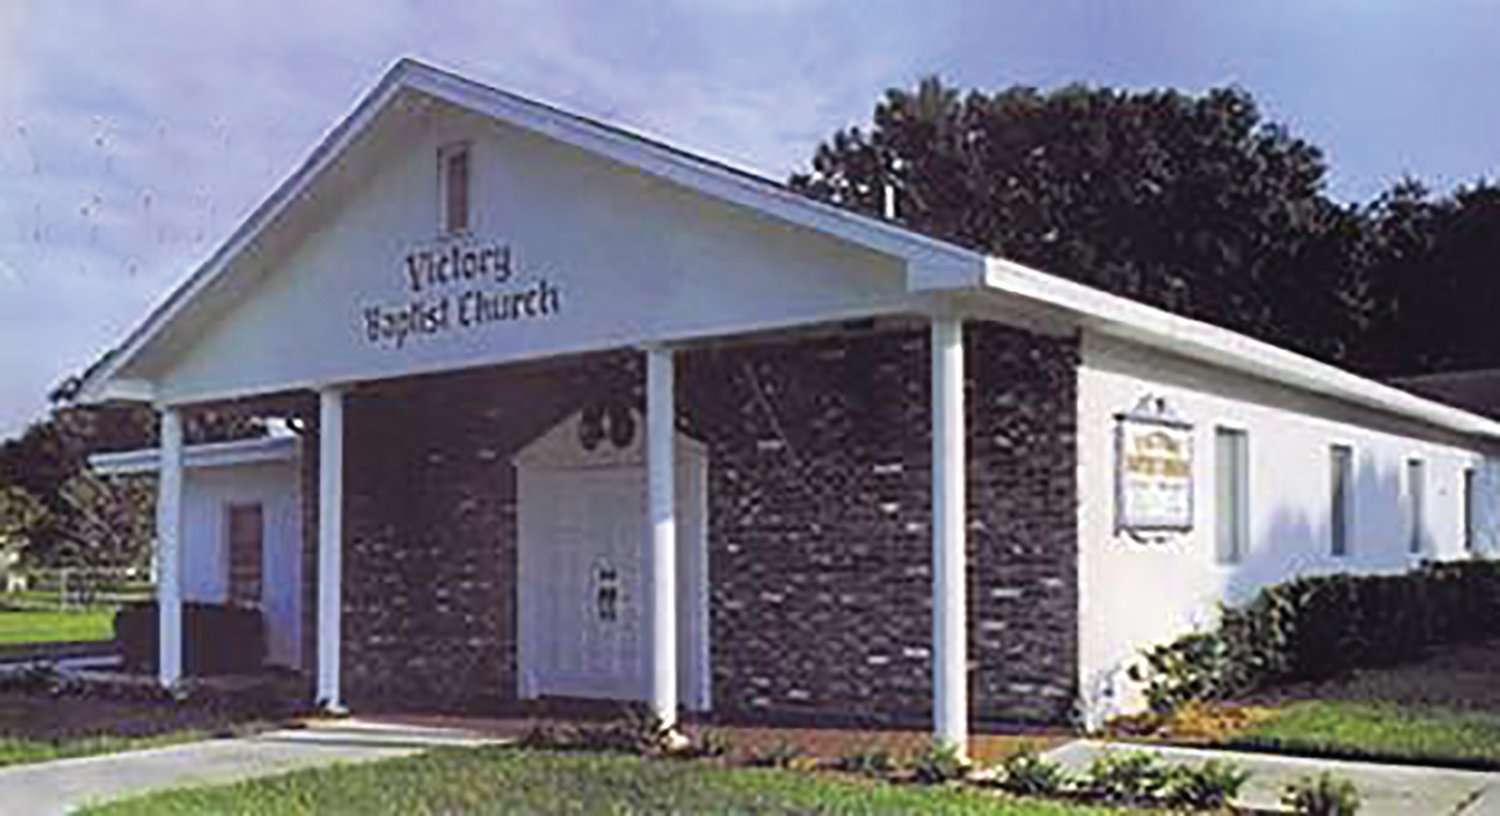 Victory Baptist Church is located at 500 S.W. 9th Street in Okeechobee.